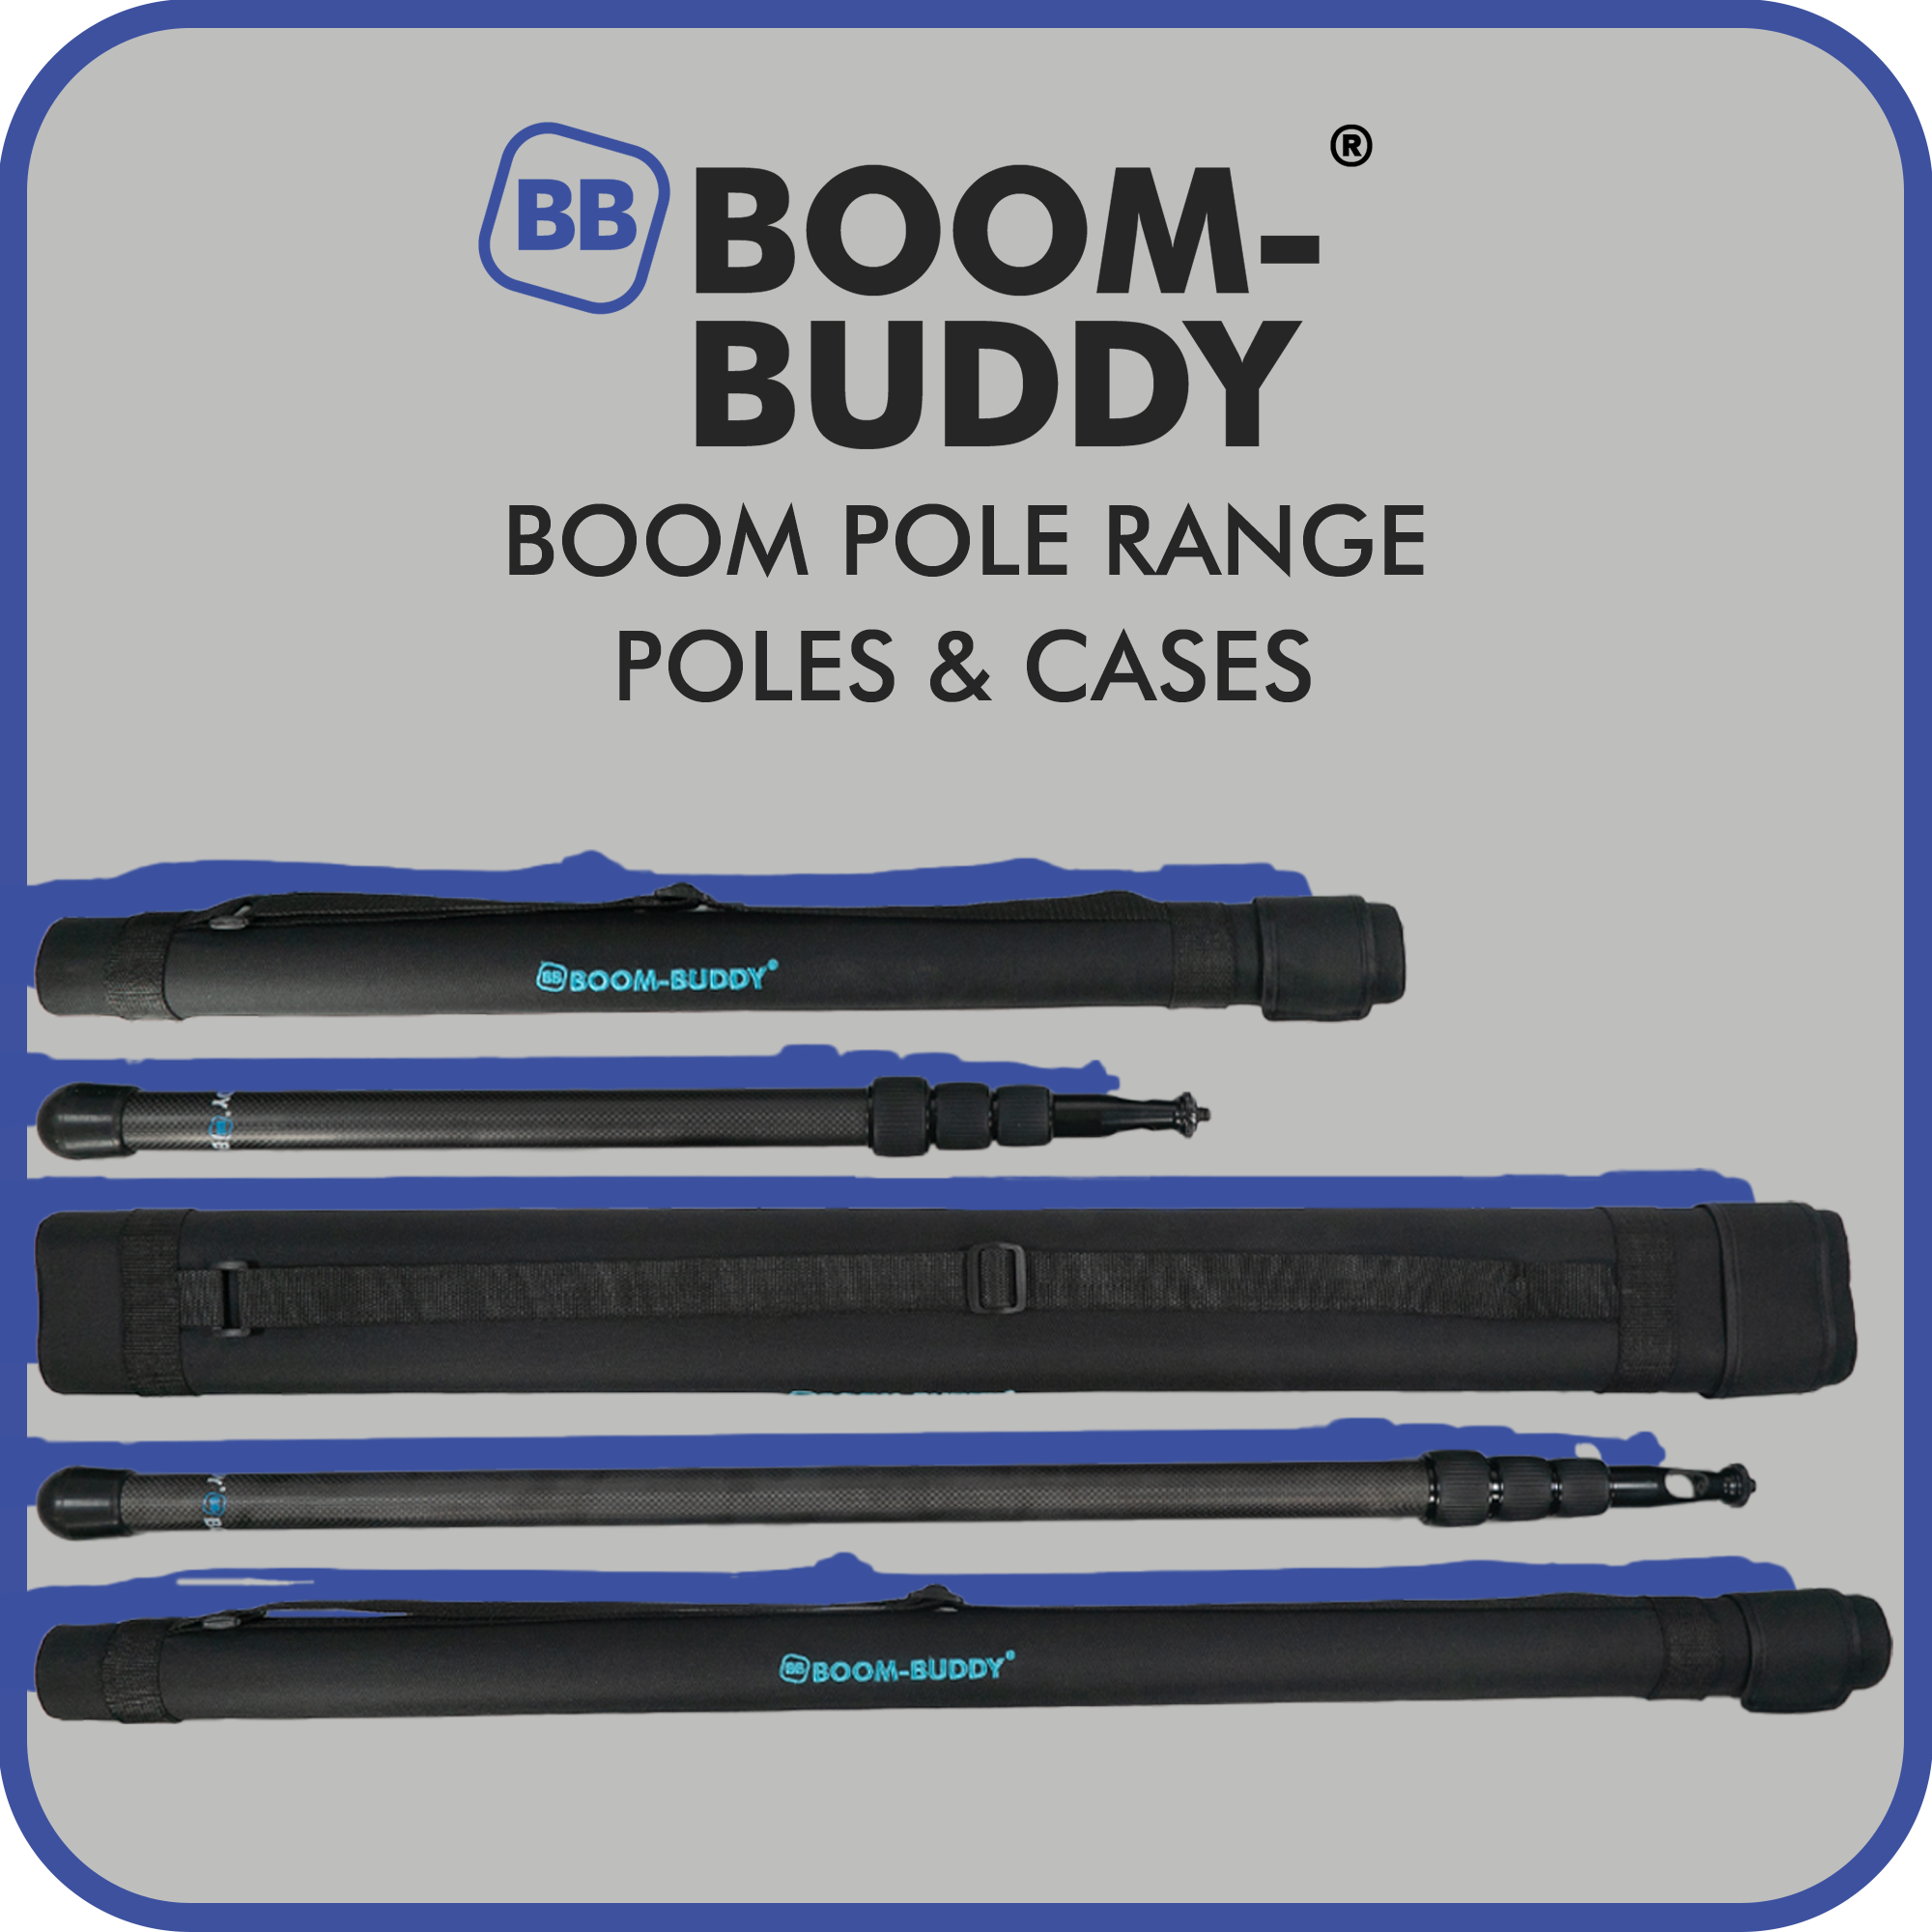 Photo of the Boom-Buddy Boom Poles and Cases next to each other. With Boom-Buddy logo and product titles.